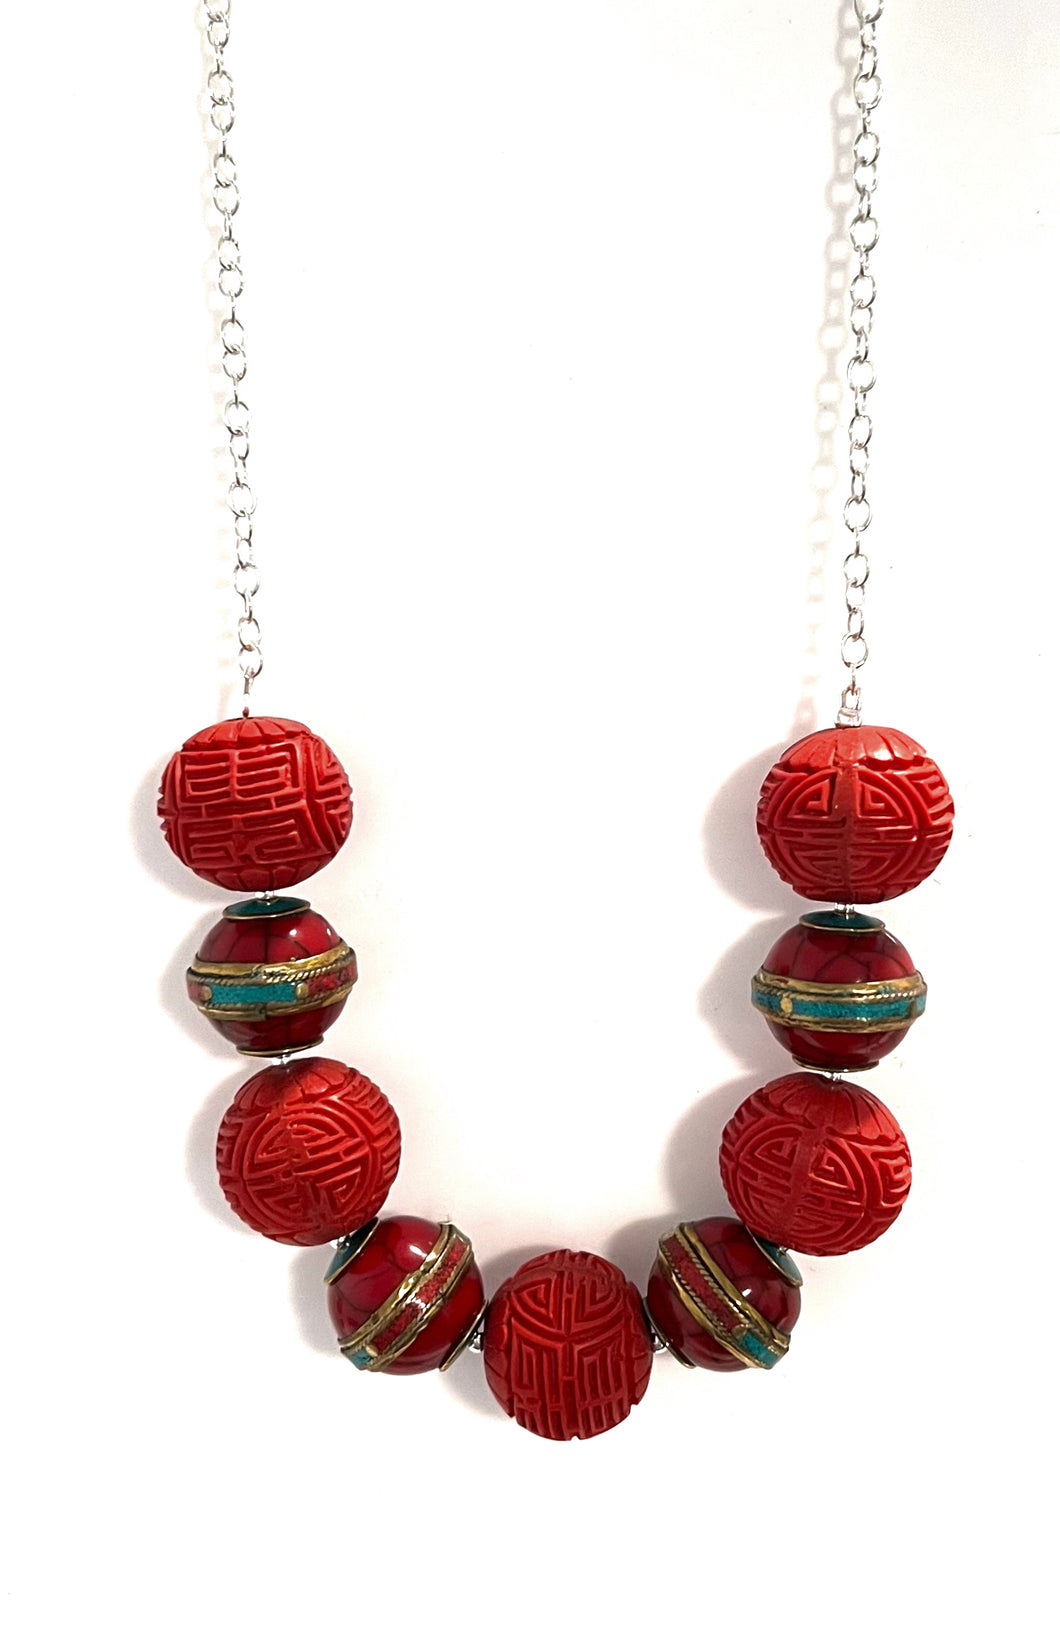 Australian Handmade Red Necklace with Cinnabar Inlaid Tibetan Beads and Sterling Silver Chain